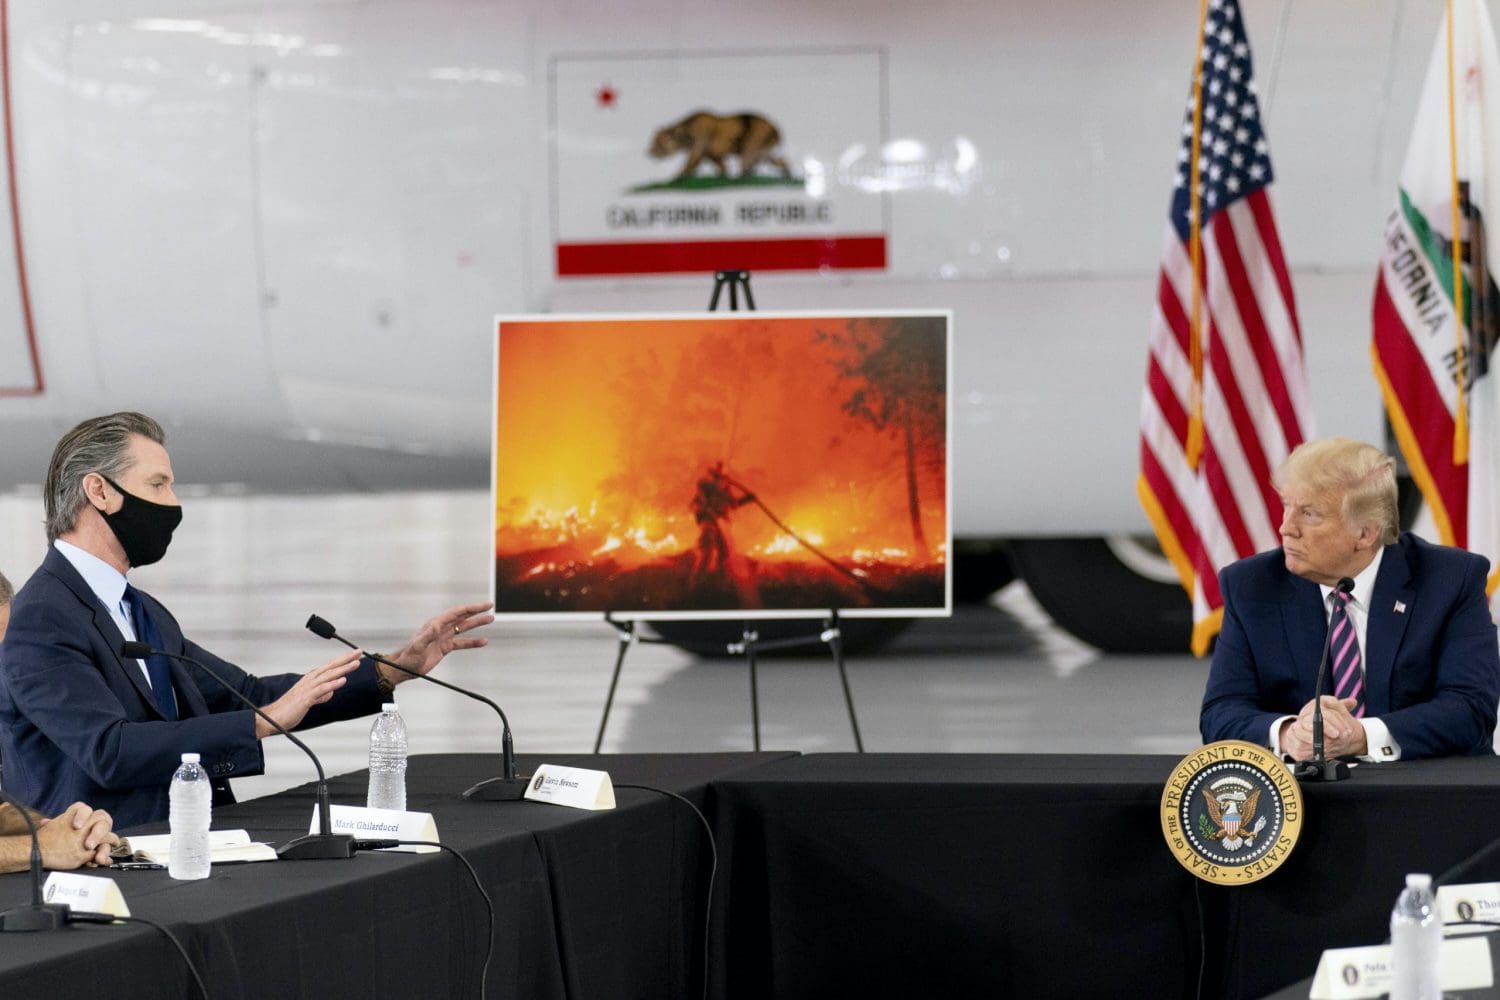 Image of a debate with Trump about wildfires